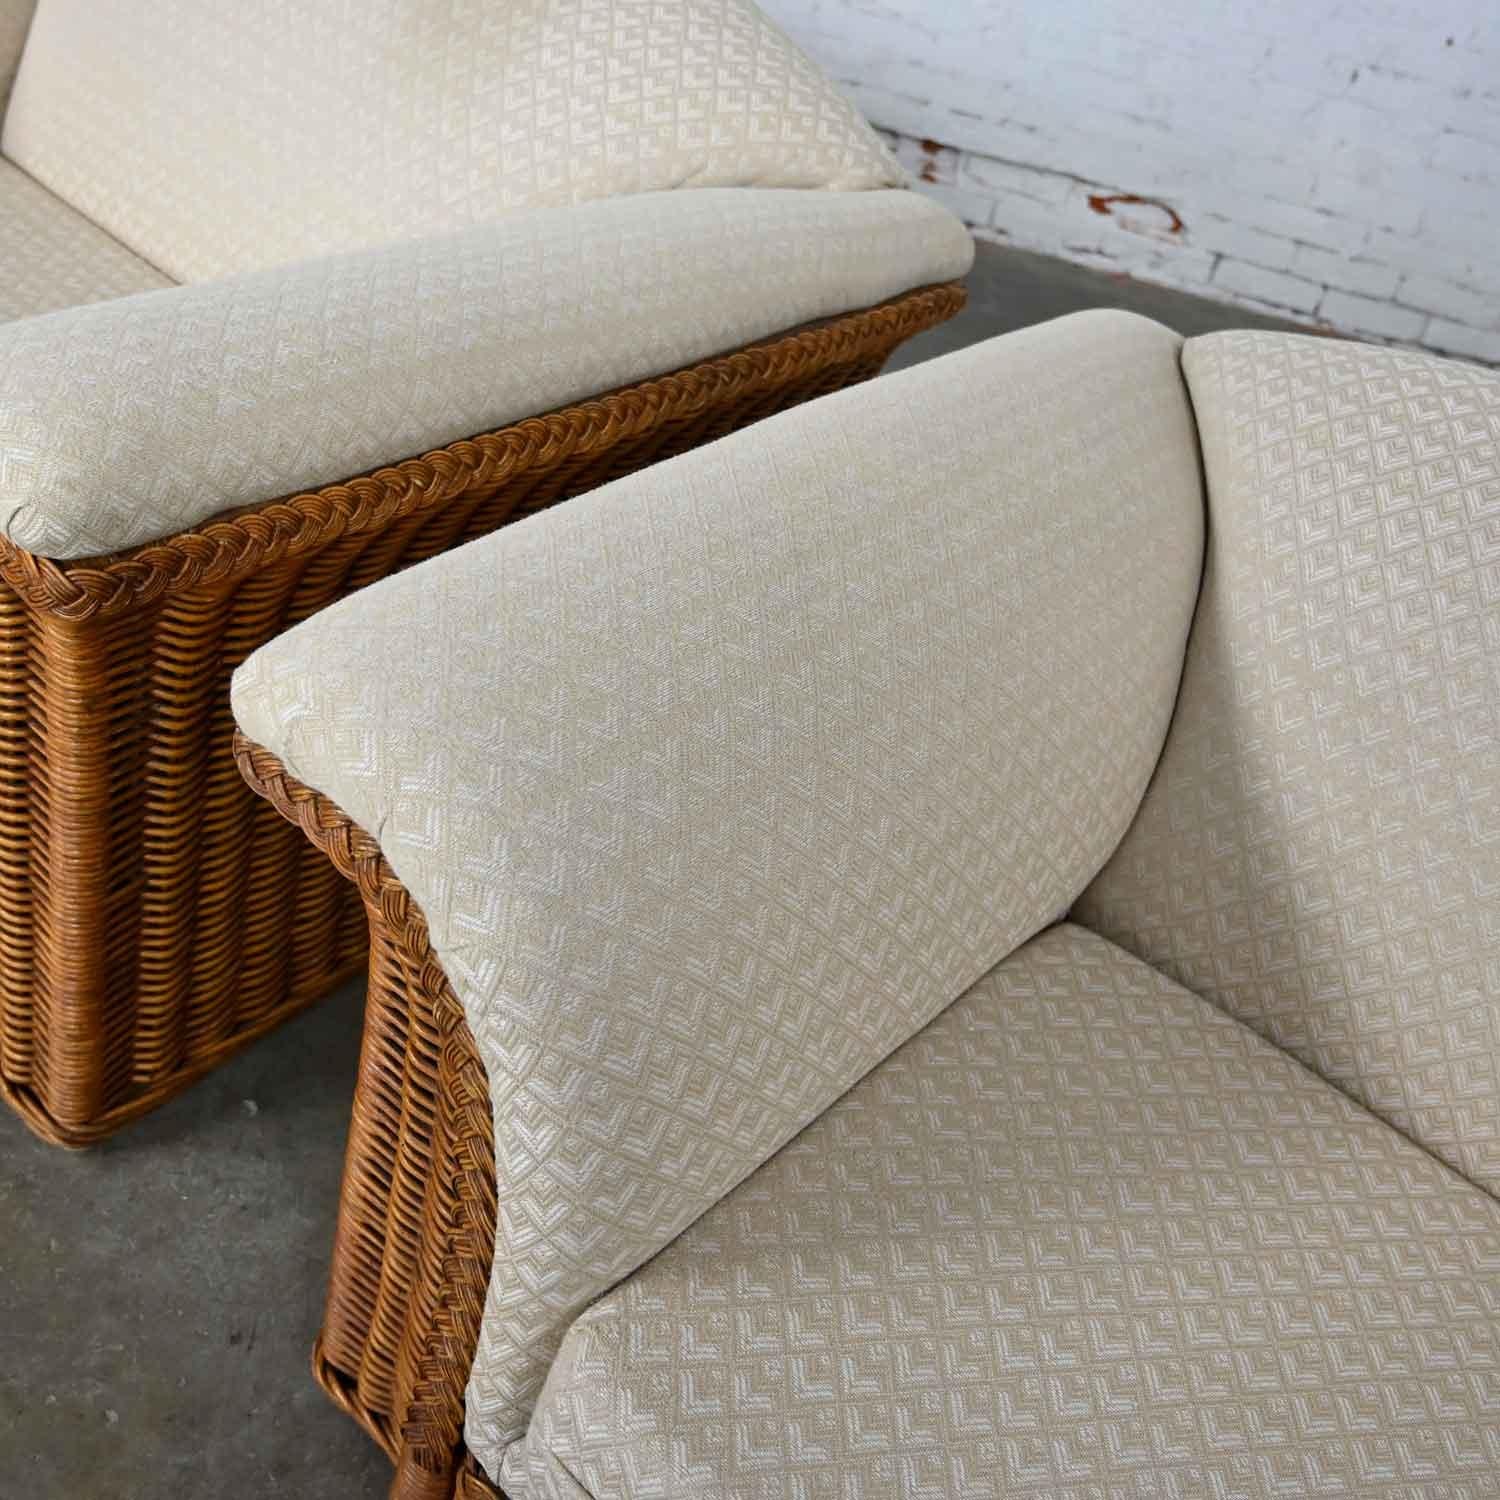 Rattan Wicker Pair of Oversized Lounge Chairs Manner of Michael Taylor For Sale 7